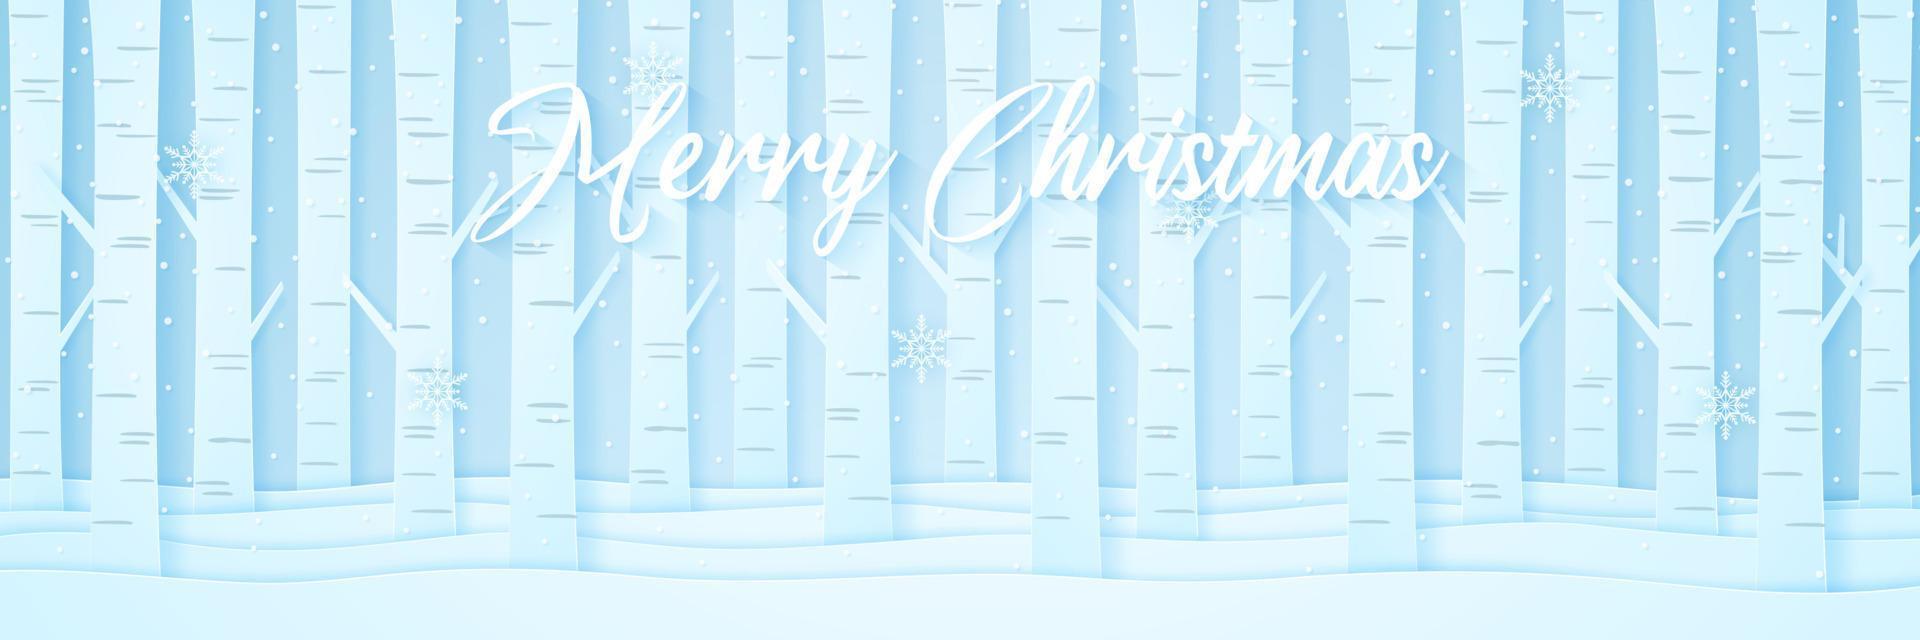 Pine trees on snow in winter landscape with snow falling and snowflakes, lettering, paper art style vector